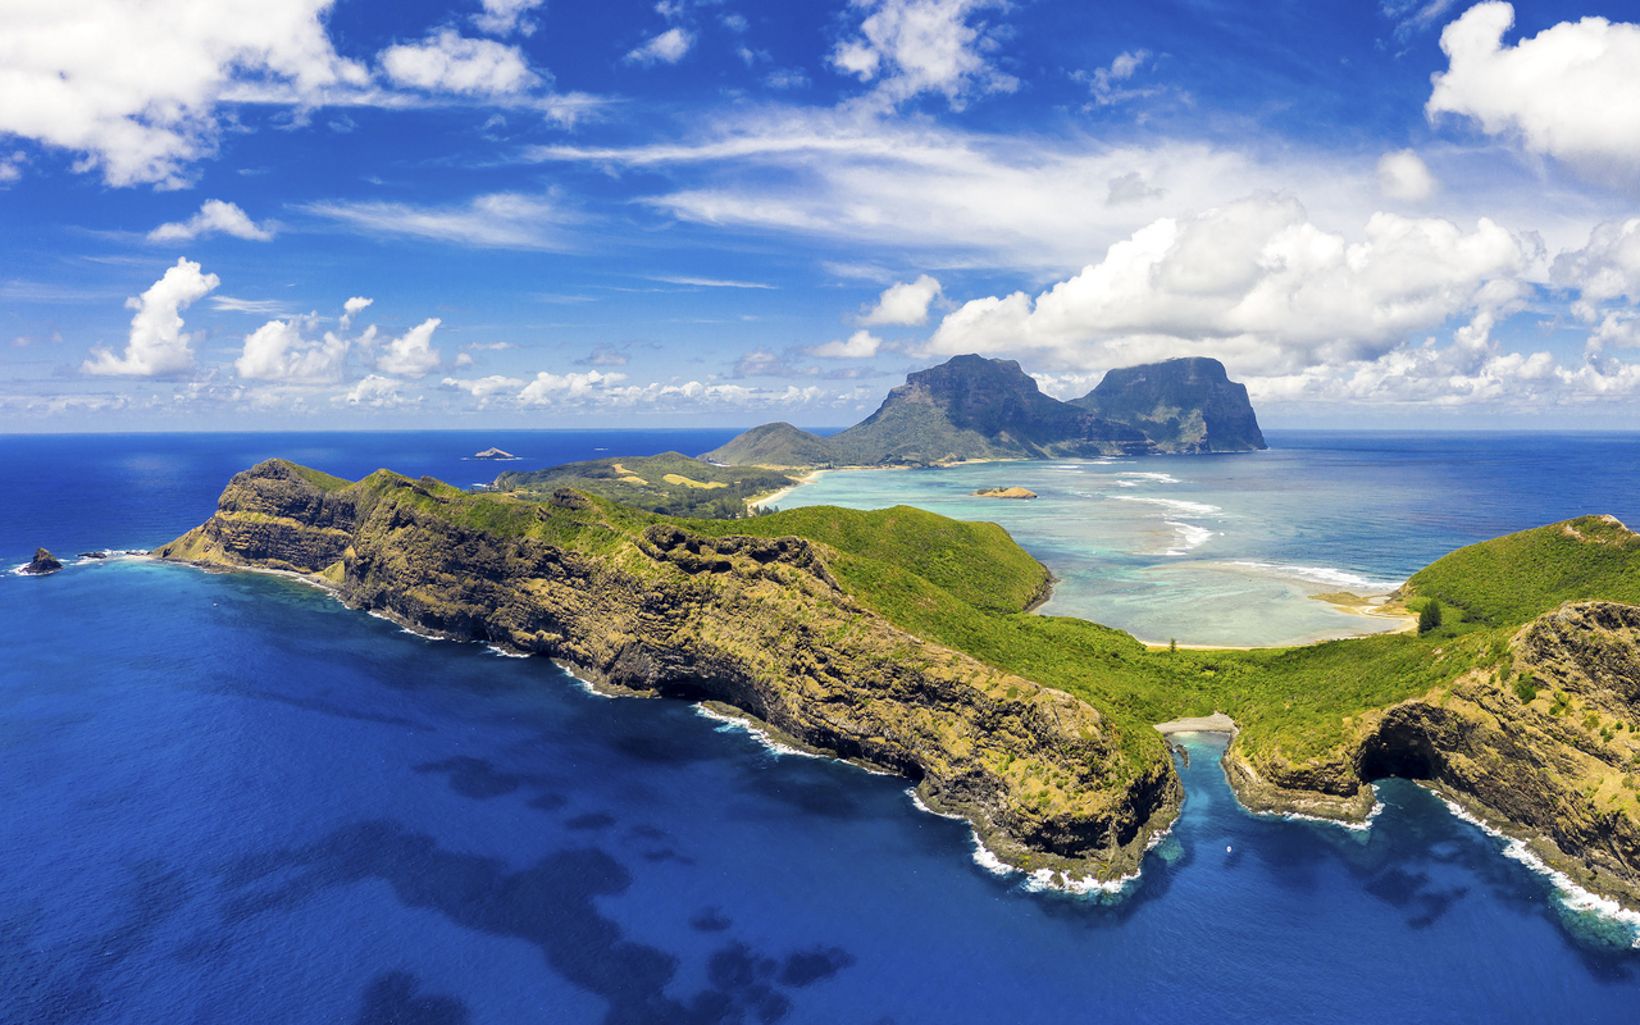 Lord Howe Island Islands total only a small fraction of our planet’s land area yet host extraordinary concentrations of unique species.  © Jordan Robins/TNC Photo Contest 2019